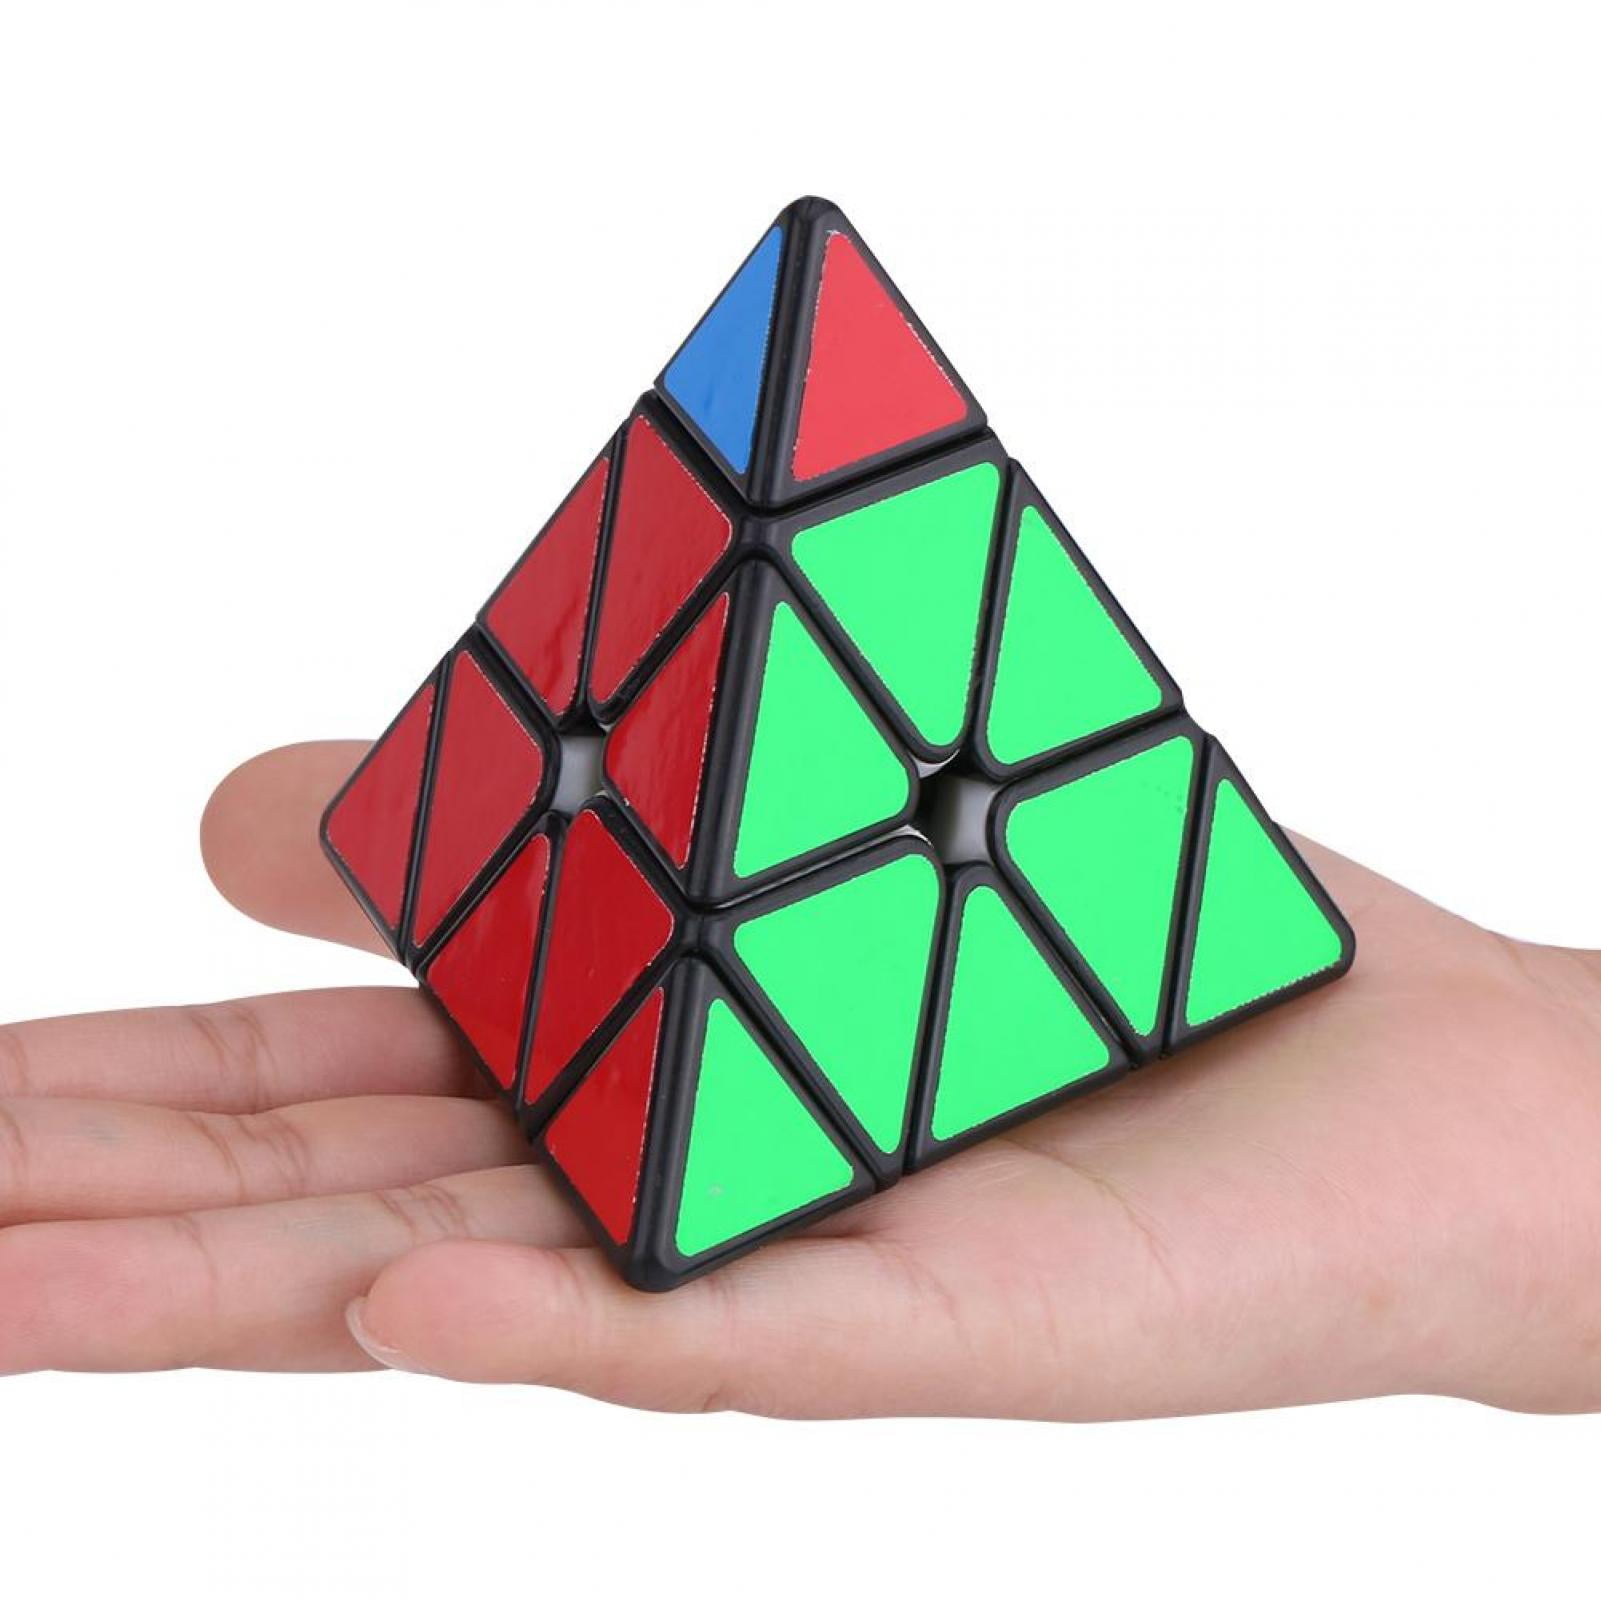 Magnetic 3x3 Pyramid Puzzle Speed Cube Luminous Blue Pyraminx Stress Relief Toy 